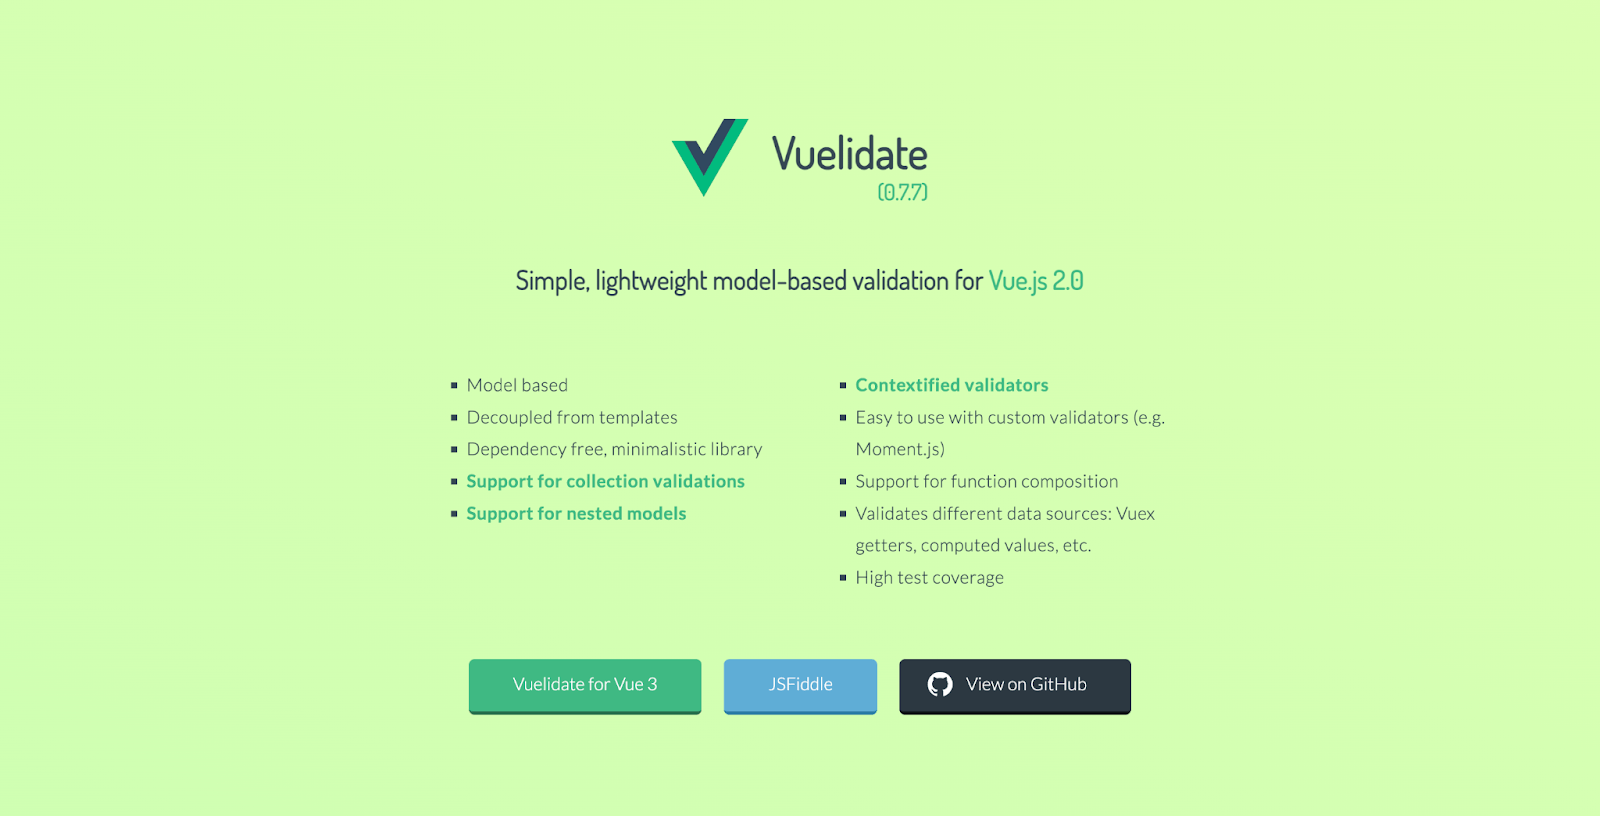 Features of Vuelidate